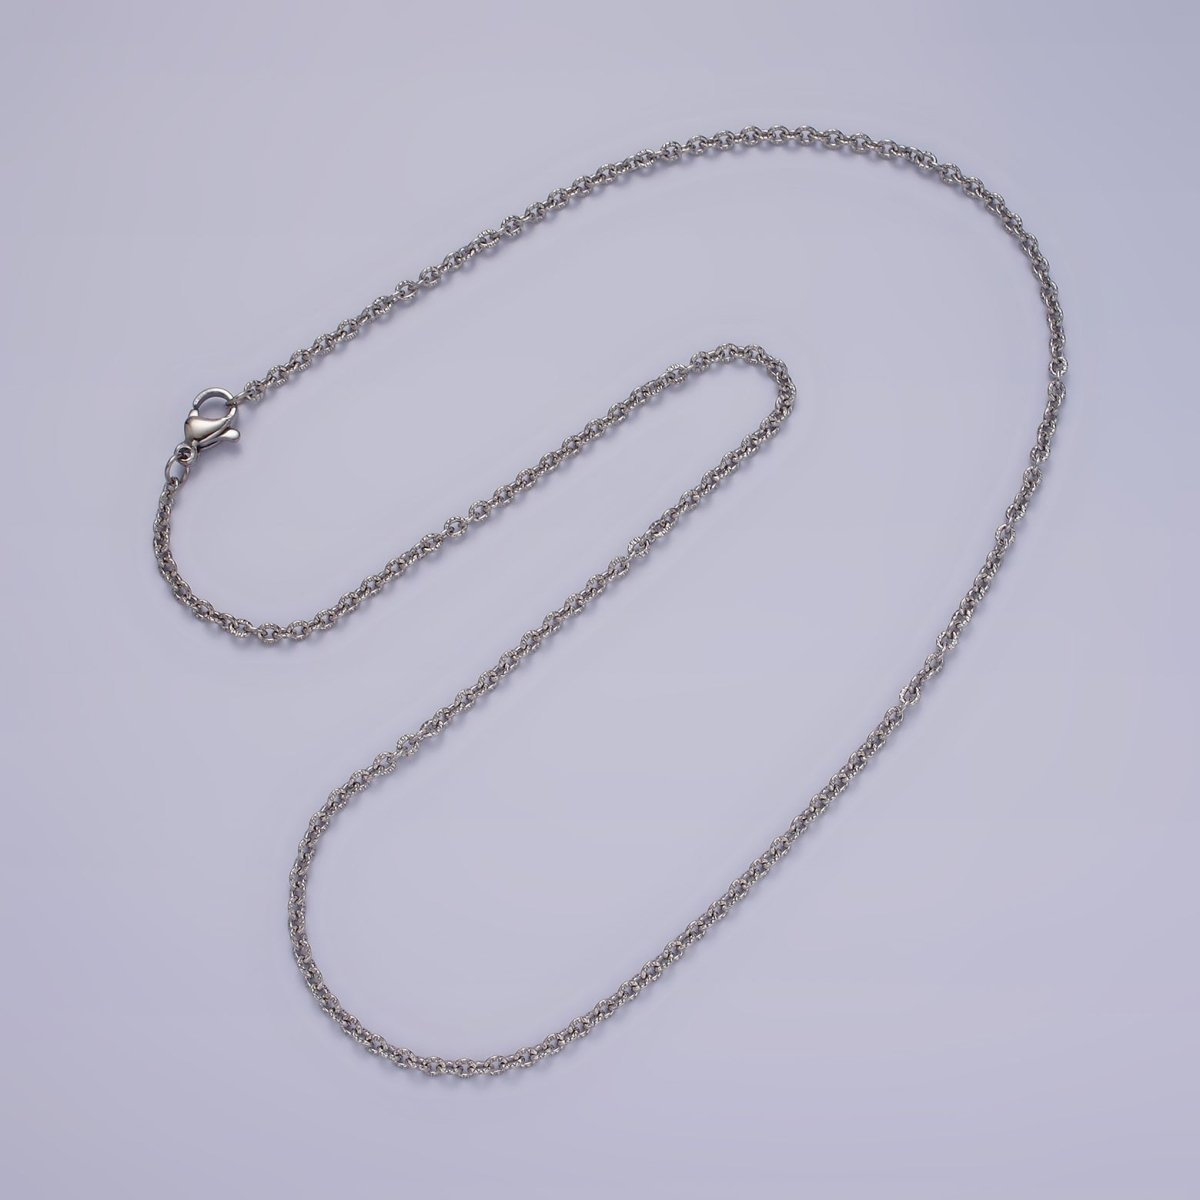 Stainless Steel 2mm Sunburst Cable 18 Inch Layering Chain Necklace in Gold & Silver | WA-1994 WA-2107 Clearance Pricing - DLUXCA